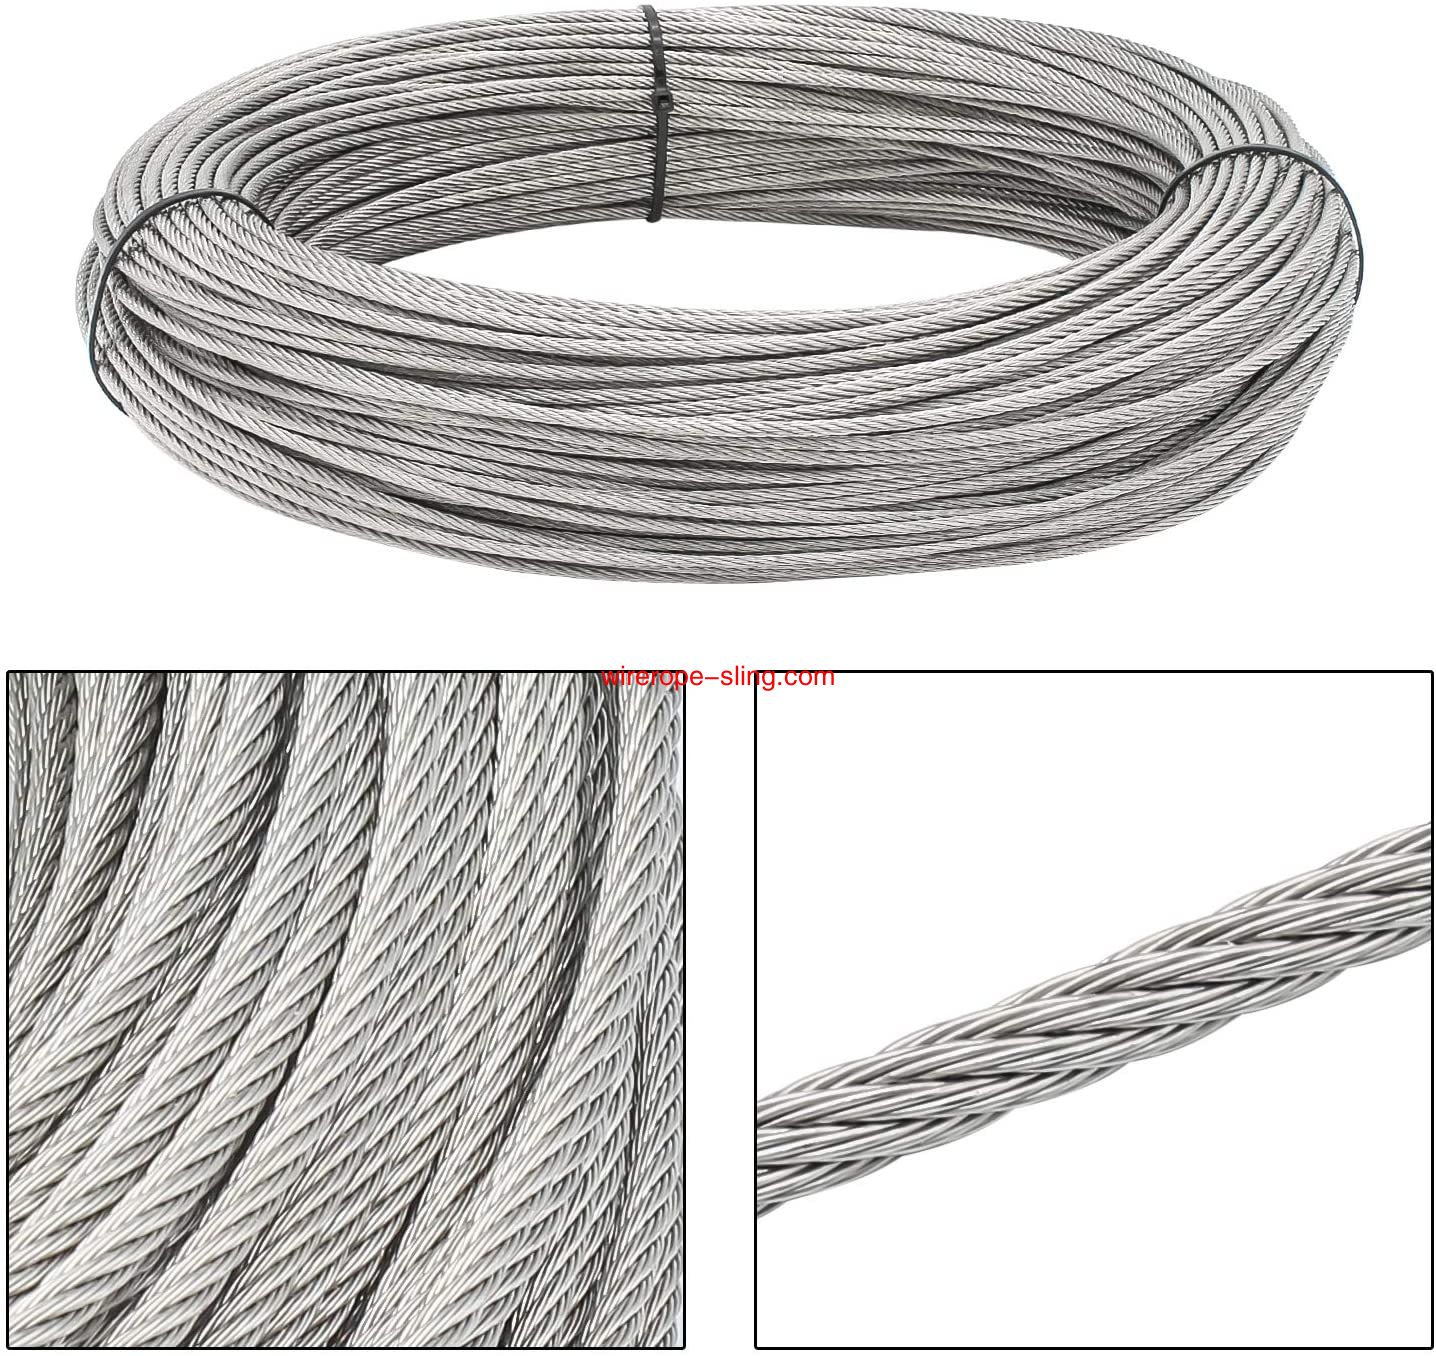 T316 Marin Grade 3mm Stainless Steel Aircraft Wire Rope Cable for Railing, Deking, Diy Balustrade, 100 Πόδια